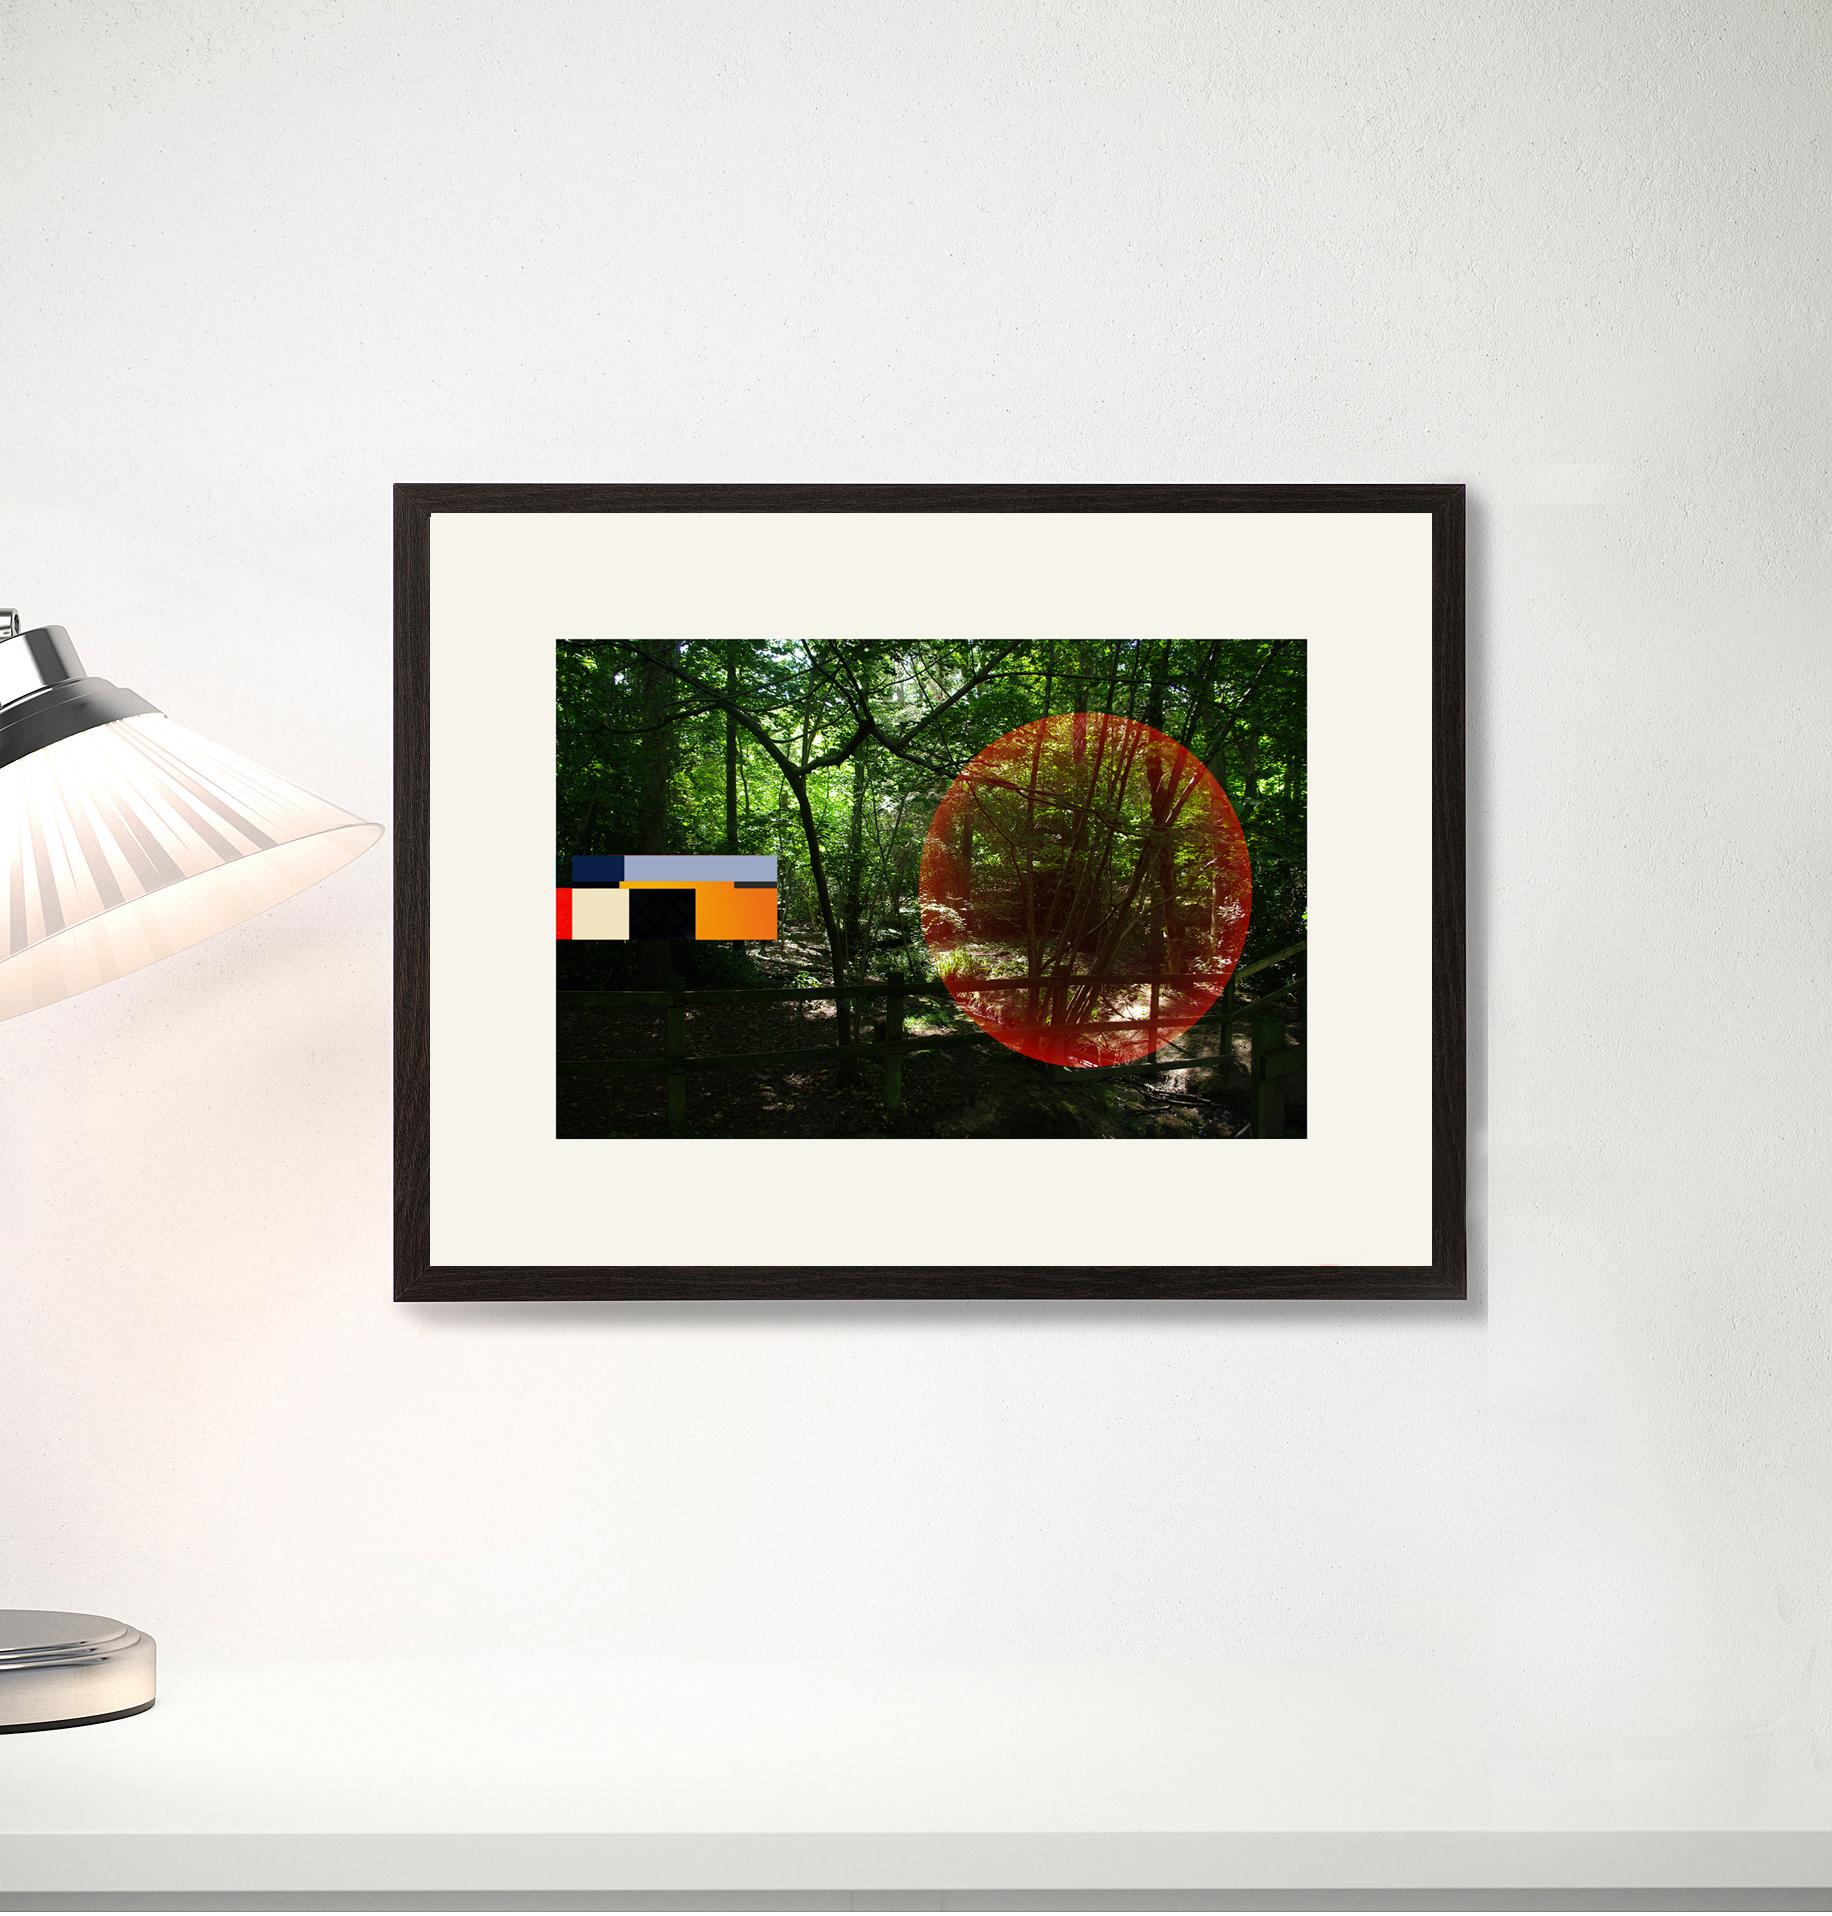 Forest - Contemporary, Abstract, Minimalism, Modern, Surrealist, Landscape - Print by Francisco Nicolás